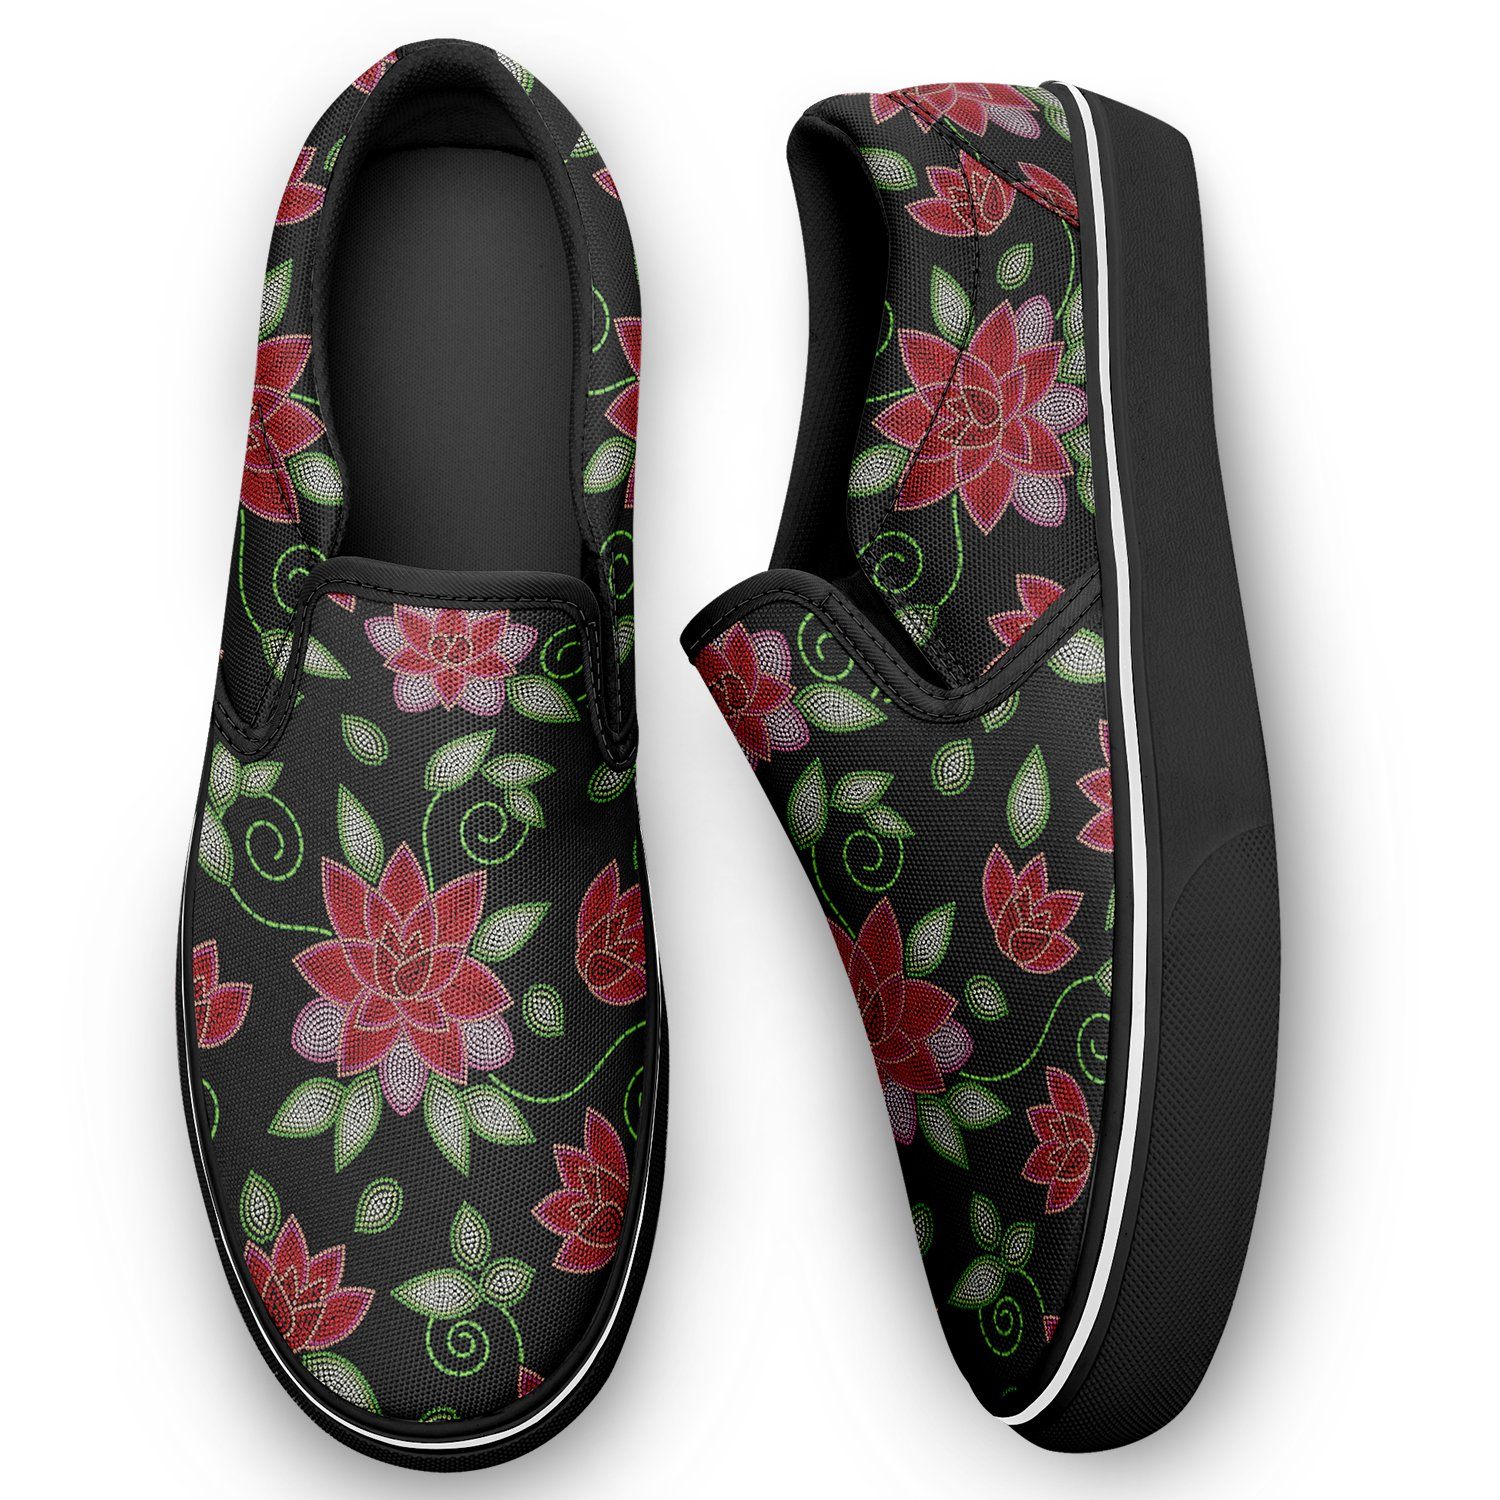 Red Beaded Rose Otoyimm Kid's Canvas Slip On Shoes otoyimm Herman 